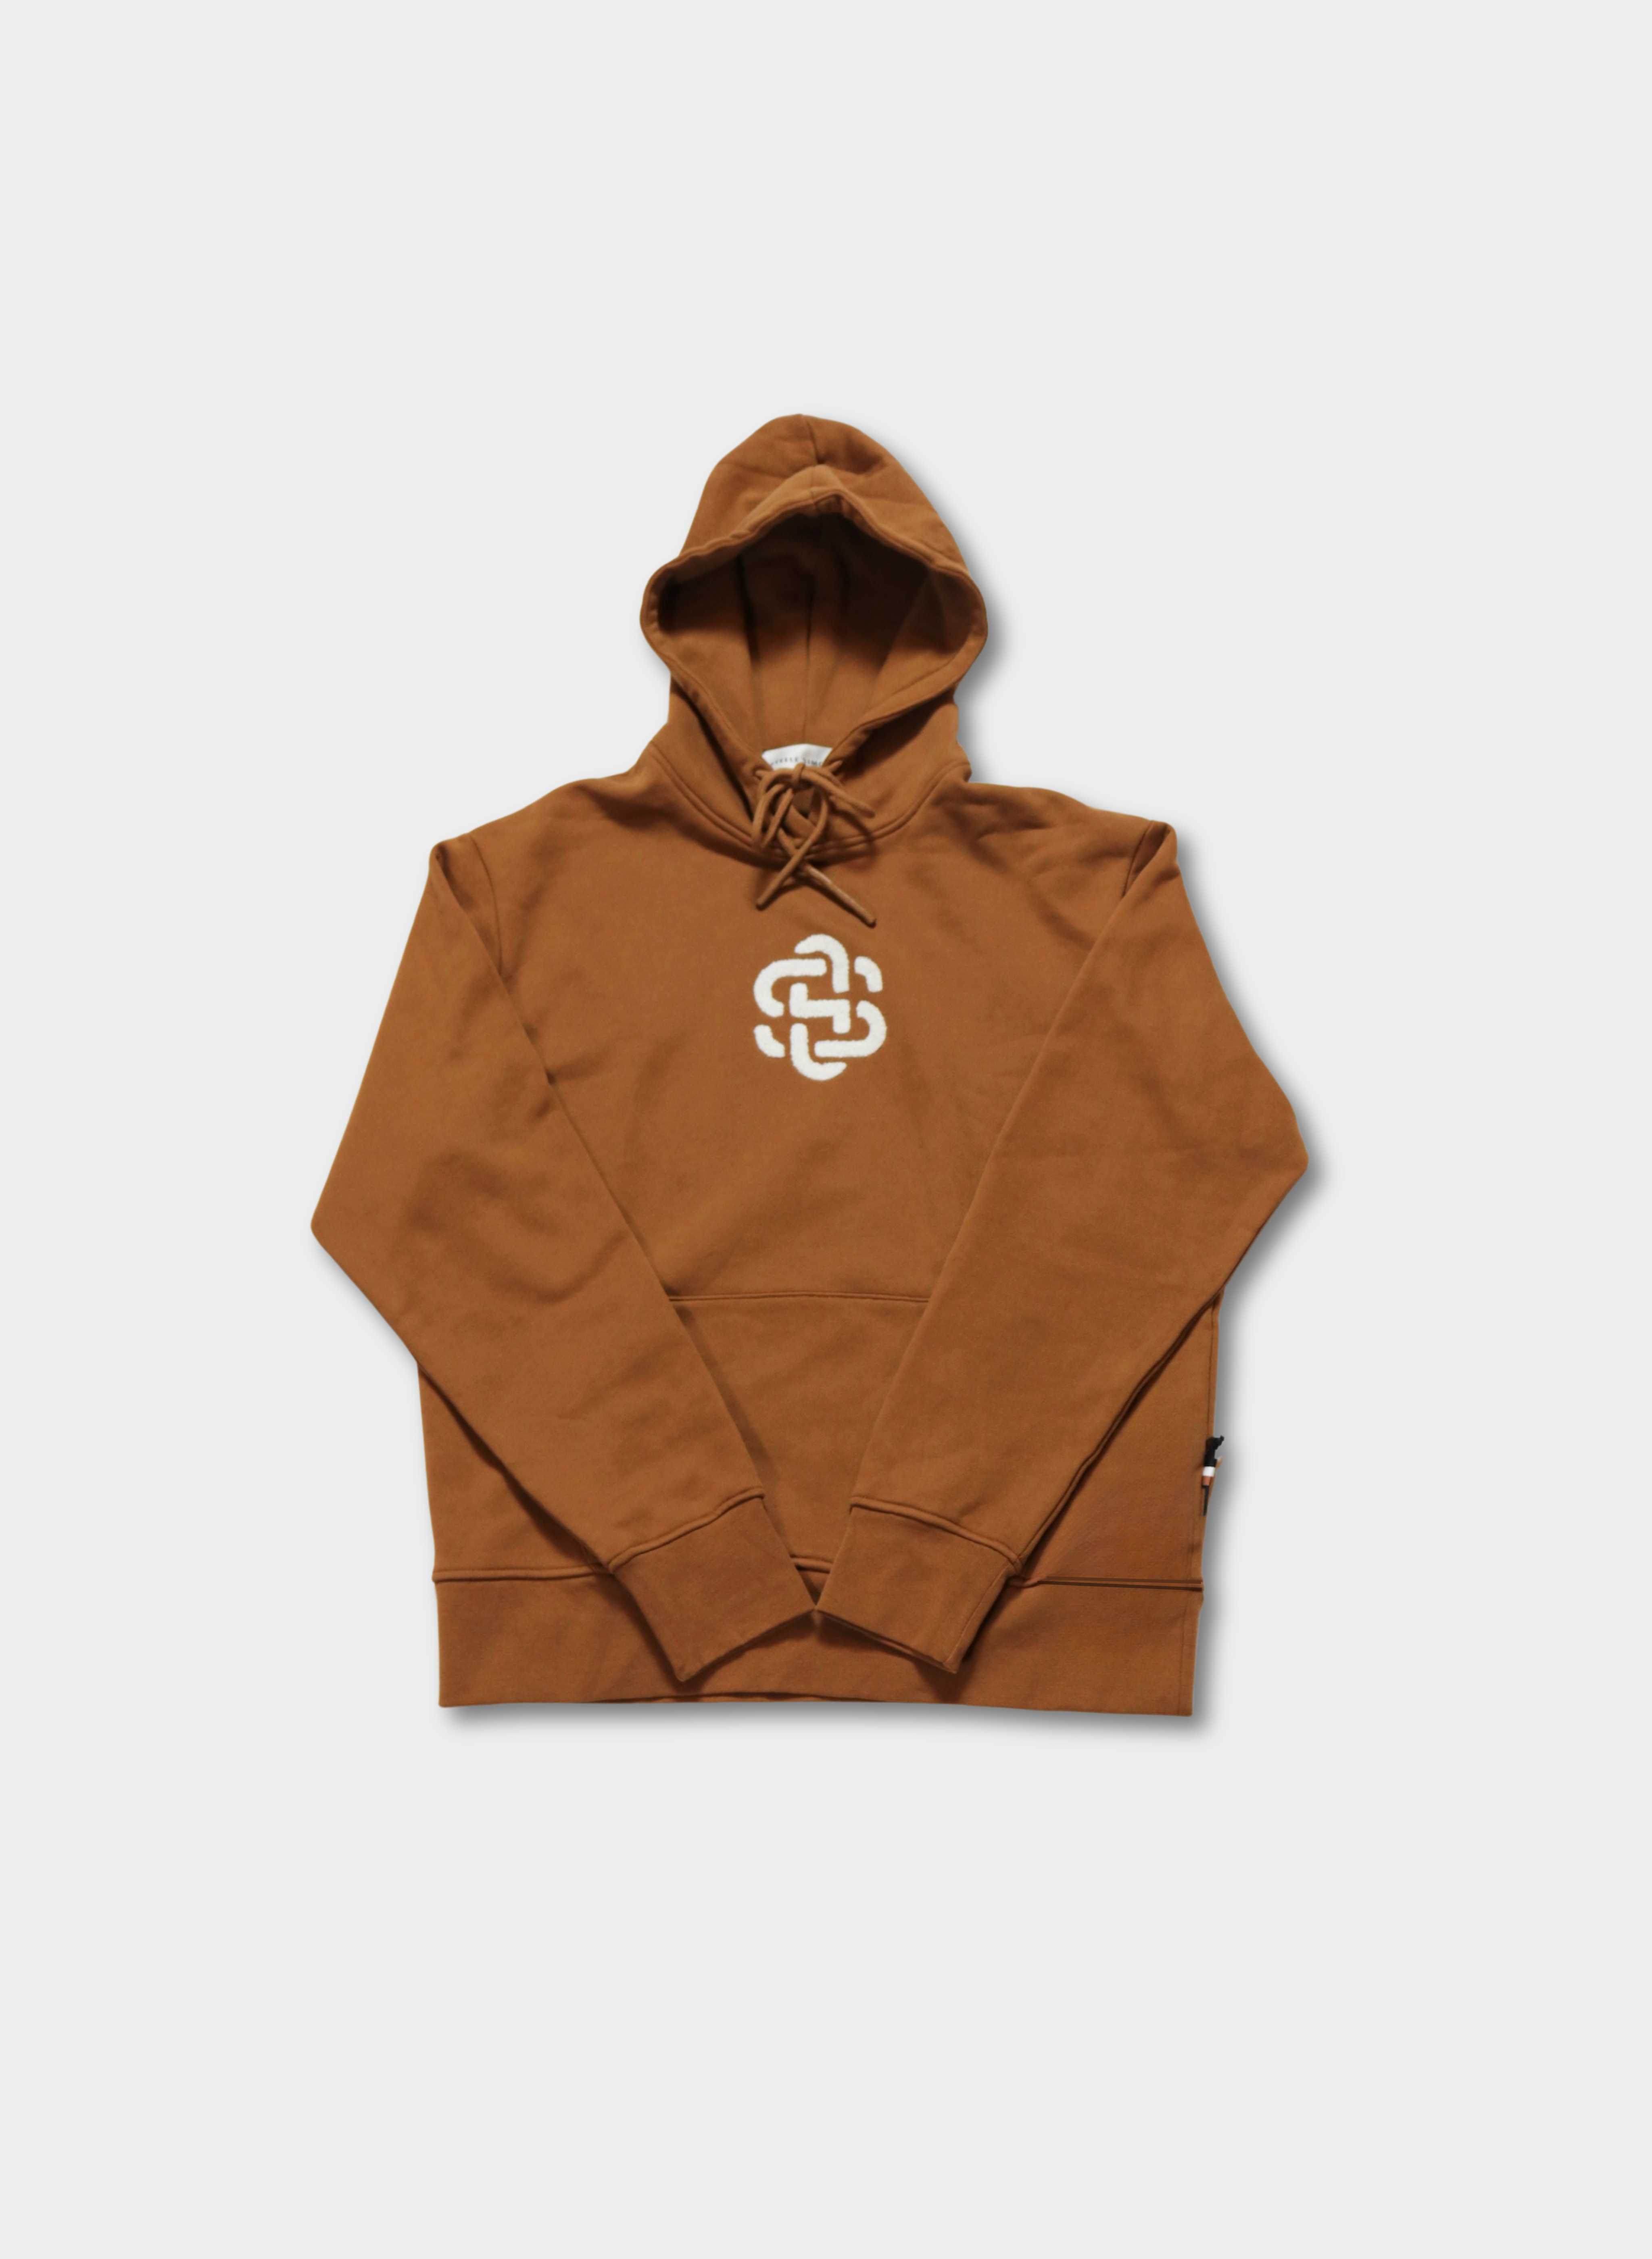 Weighted Cotton Emblem Hoodie (Copper)